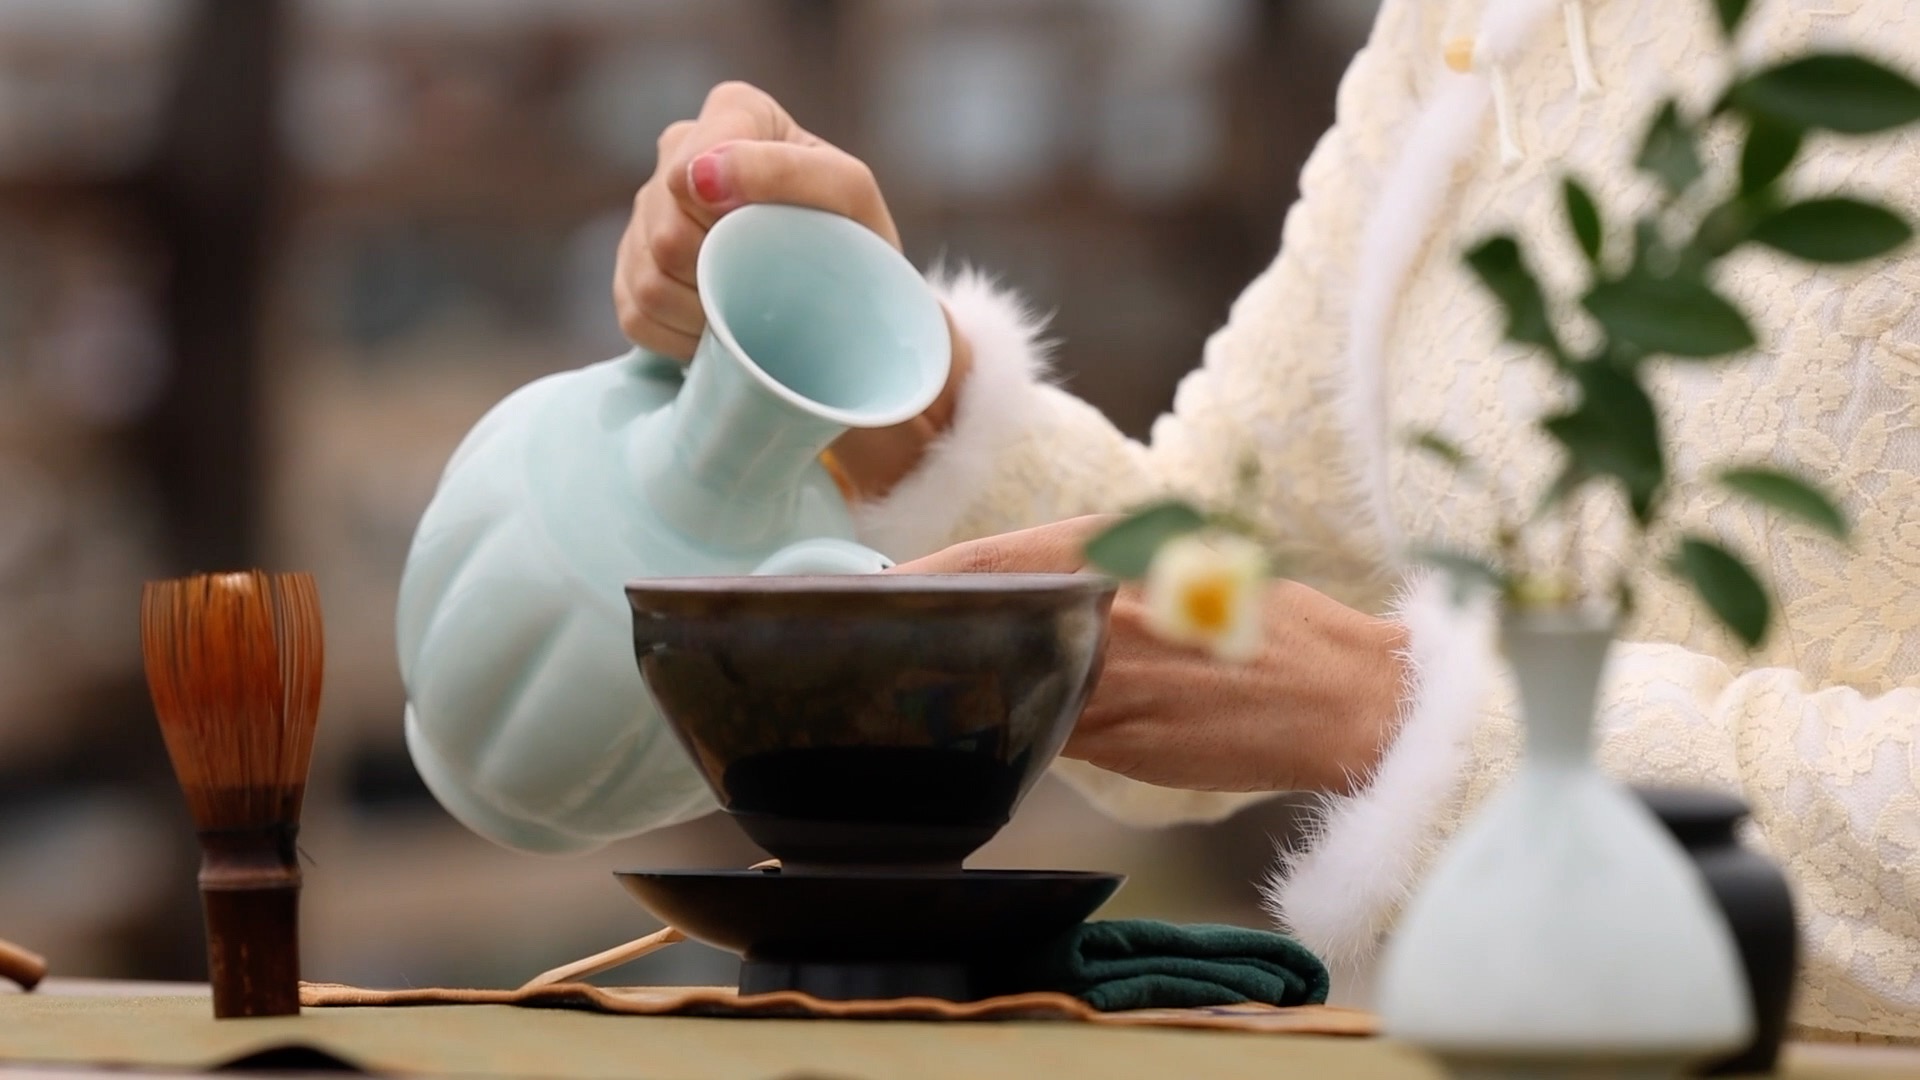 The Jingshan tea ceremony is among the forms of tea heritage included in UNESCO's intangible cultural heritage list. /CGTN